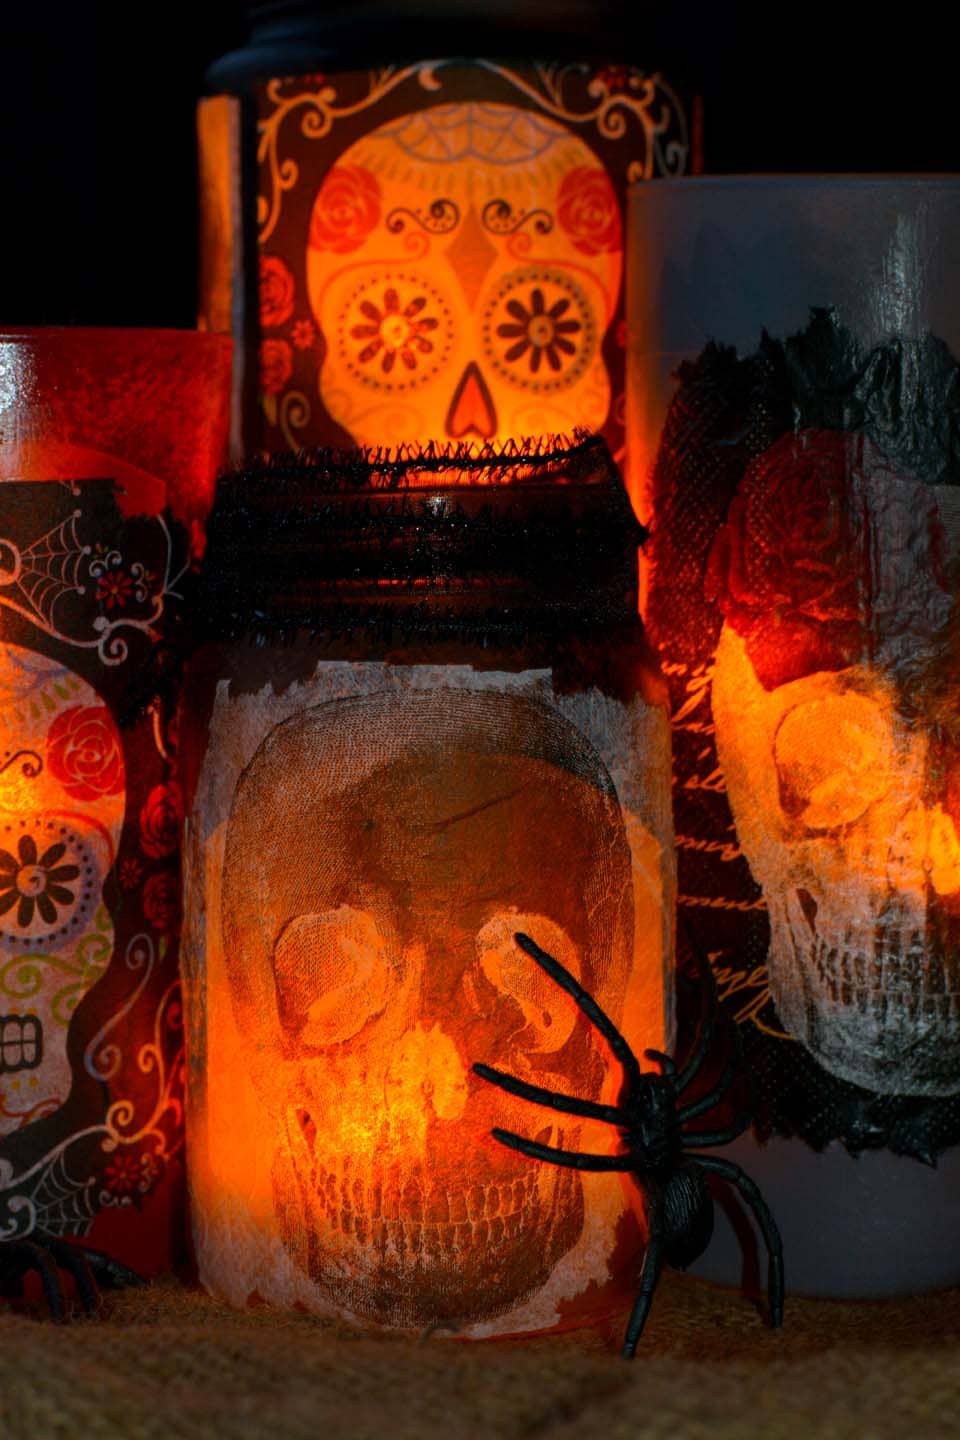 Do you love Day of the Dead crafts? Use napkins to create these unique decorative luminaries! So fun for Halloween and beyond.